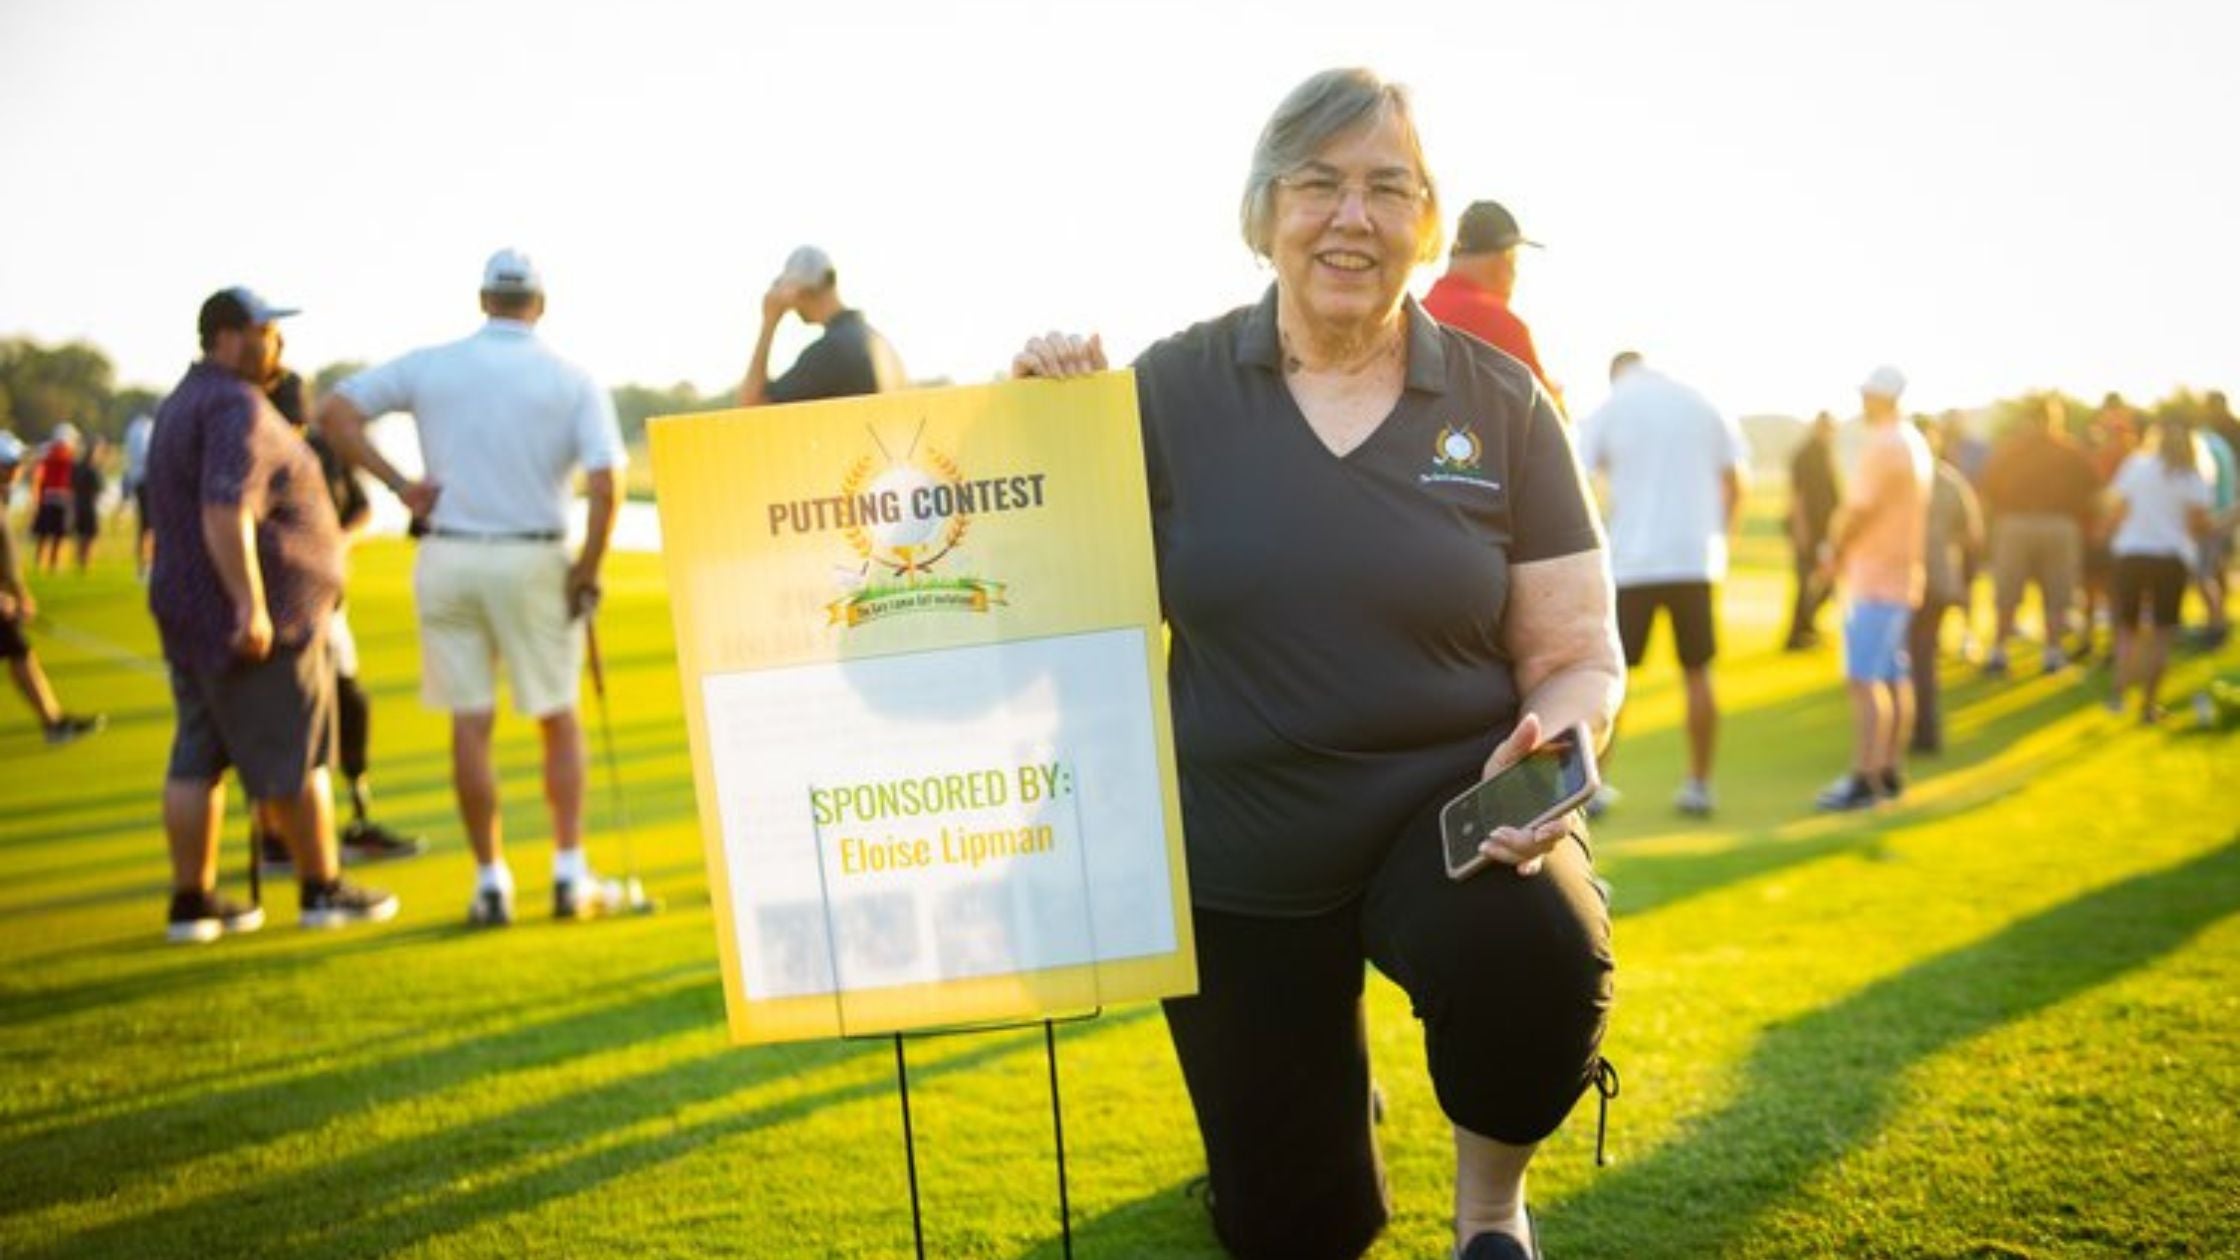 Eloisee Lipman holding up a sponsorship sign at the golf tournament